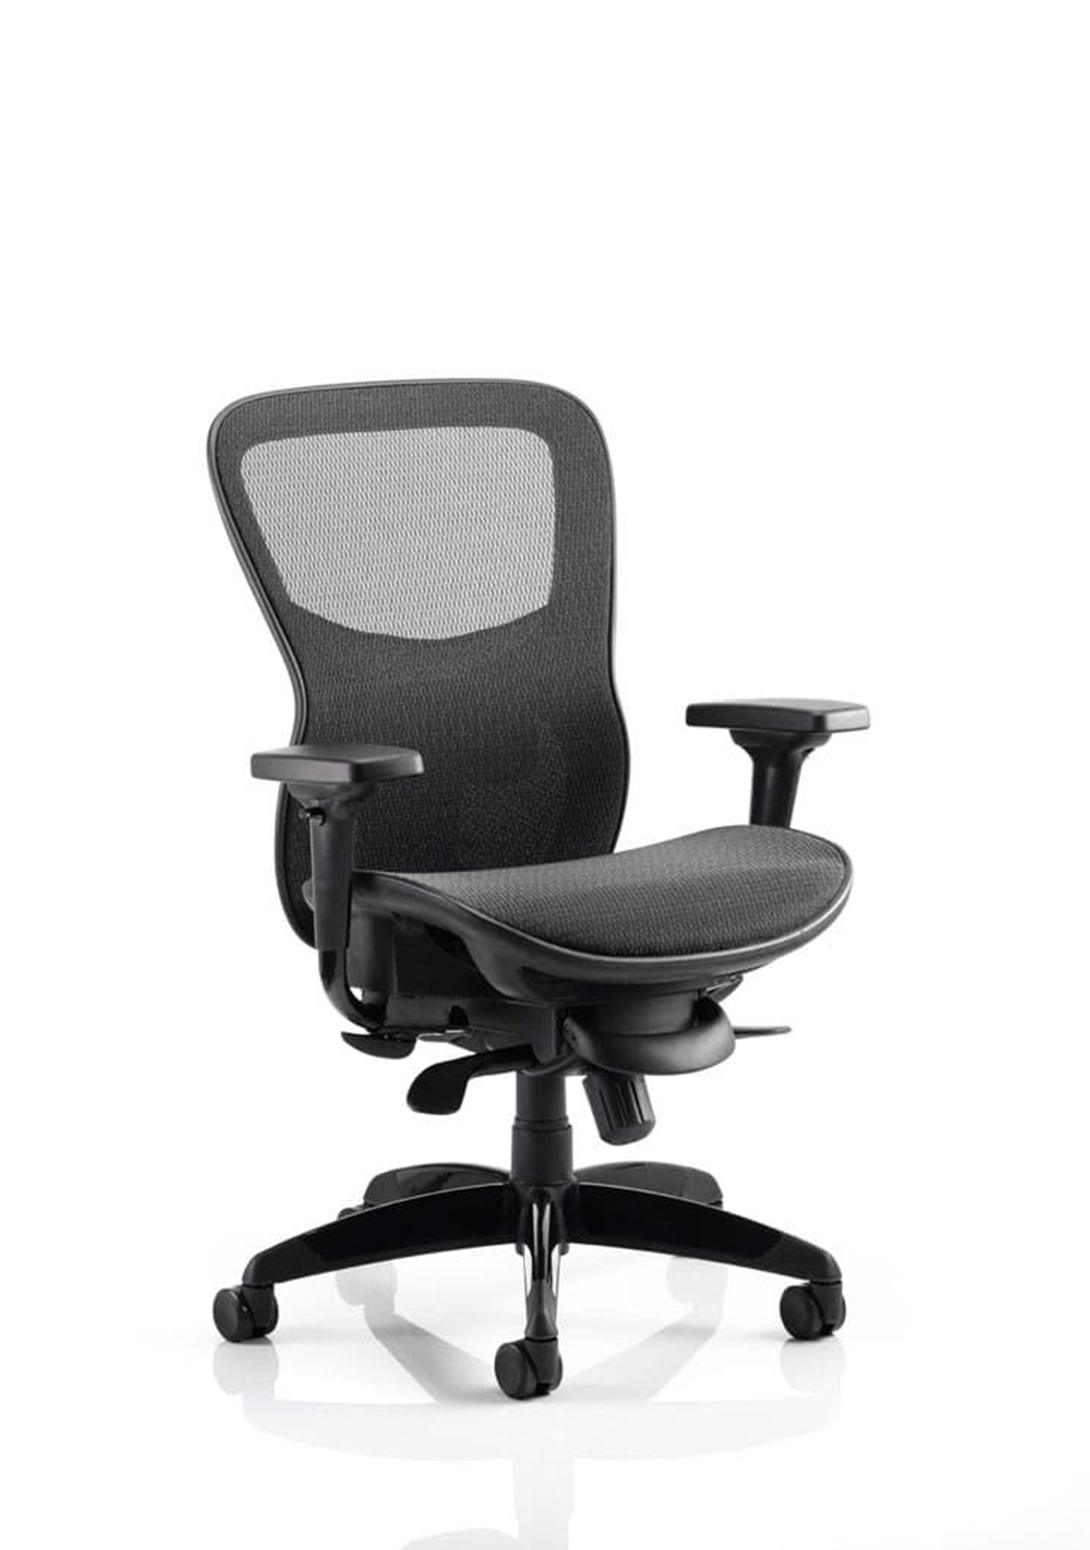 Stealth Shadow High Mesh Back Ergonomic Posture Chair with Arms